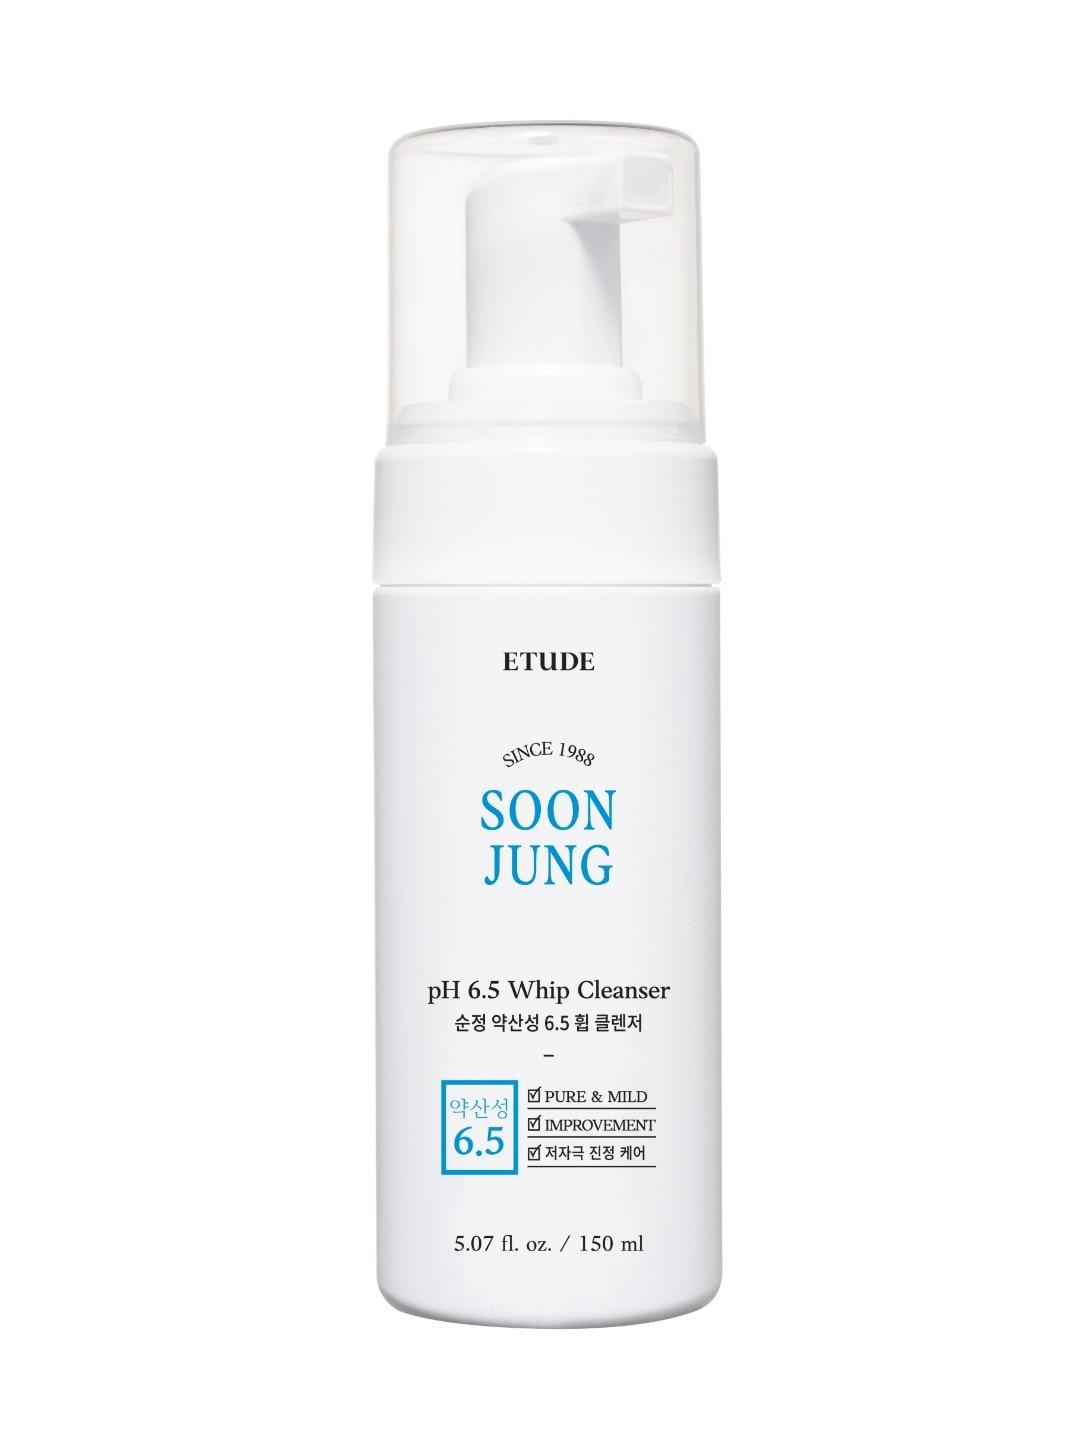 ETUDE Soon Jung pH 6.5 Whip Cleanser Face Wash with Panthenol & Madecassoside - 150ml